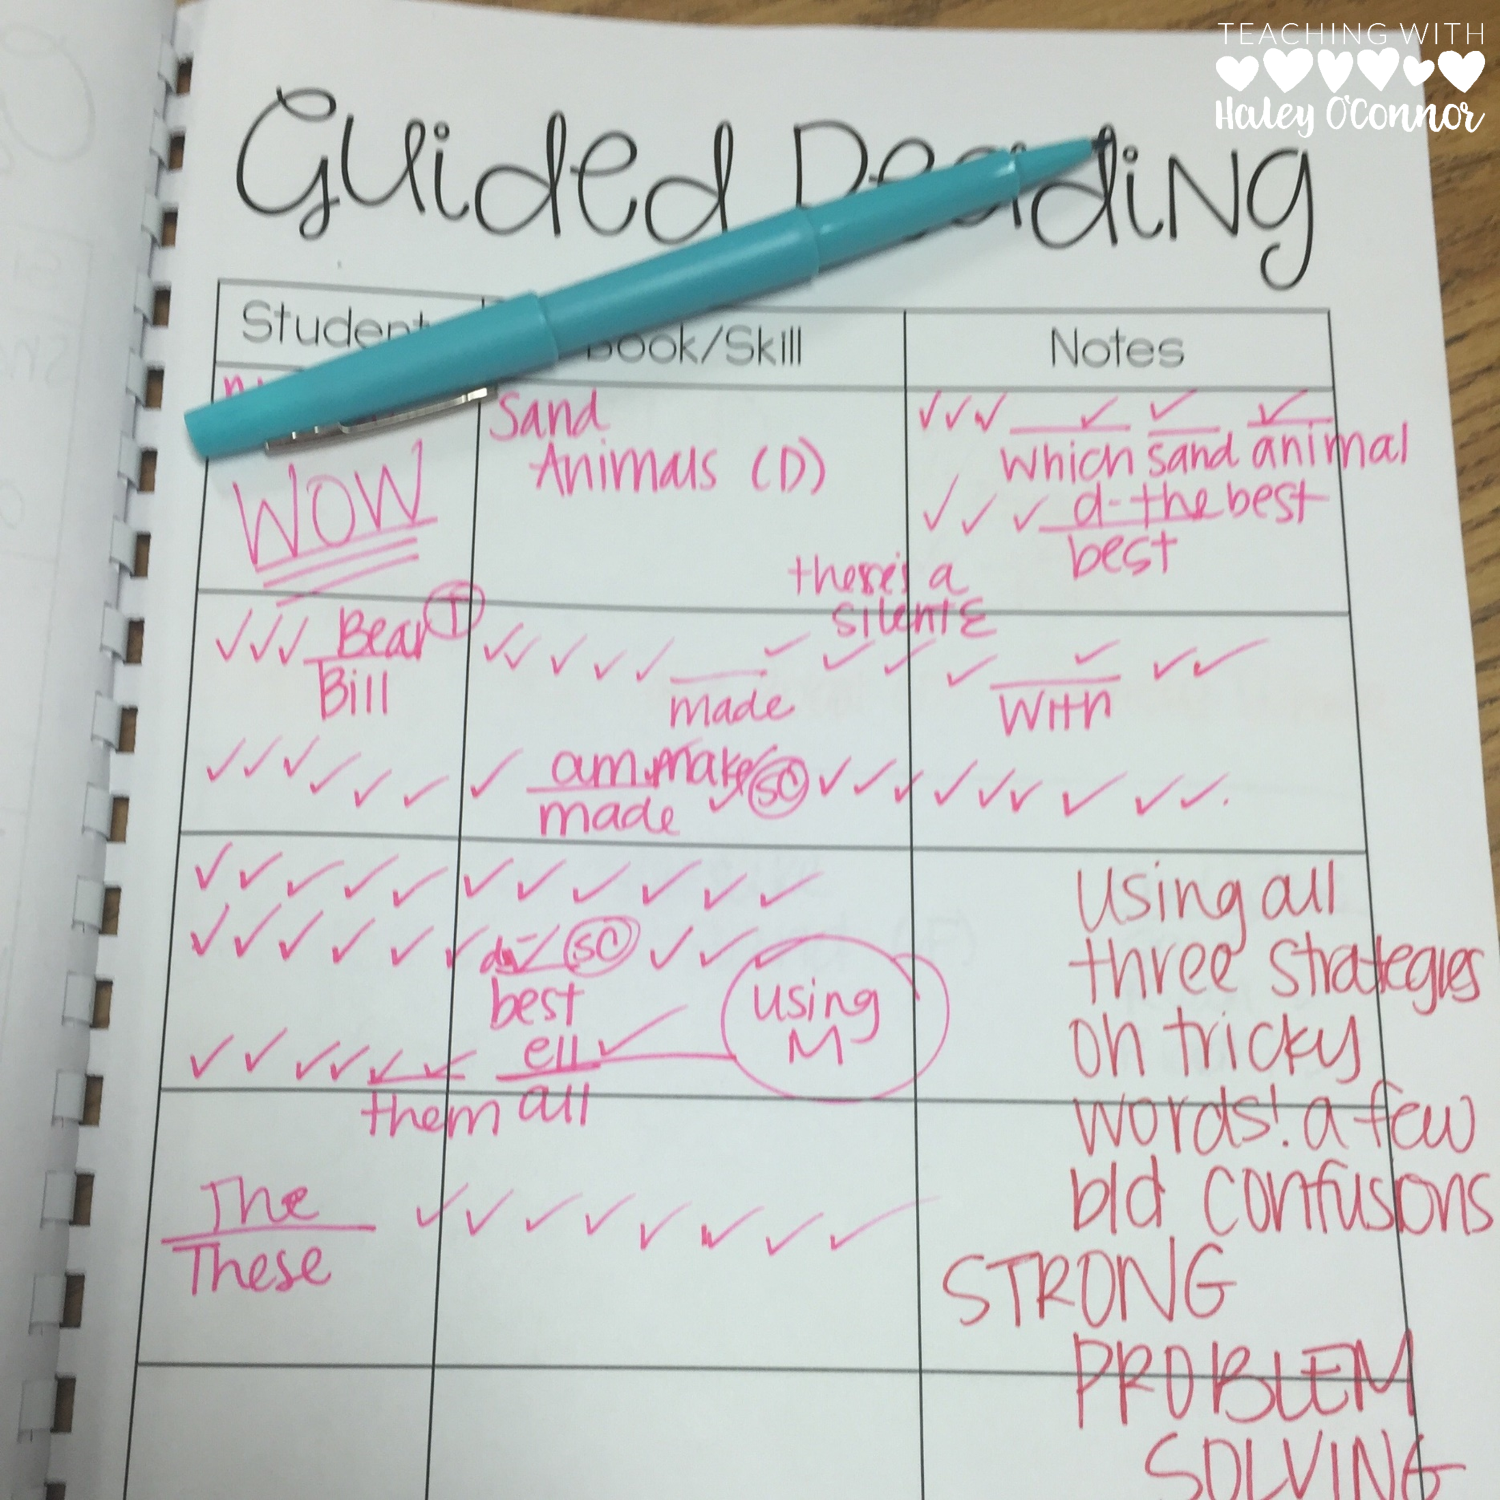 Guided Reading Notes